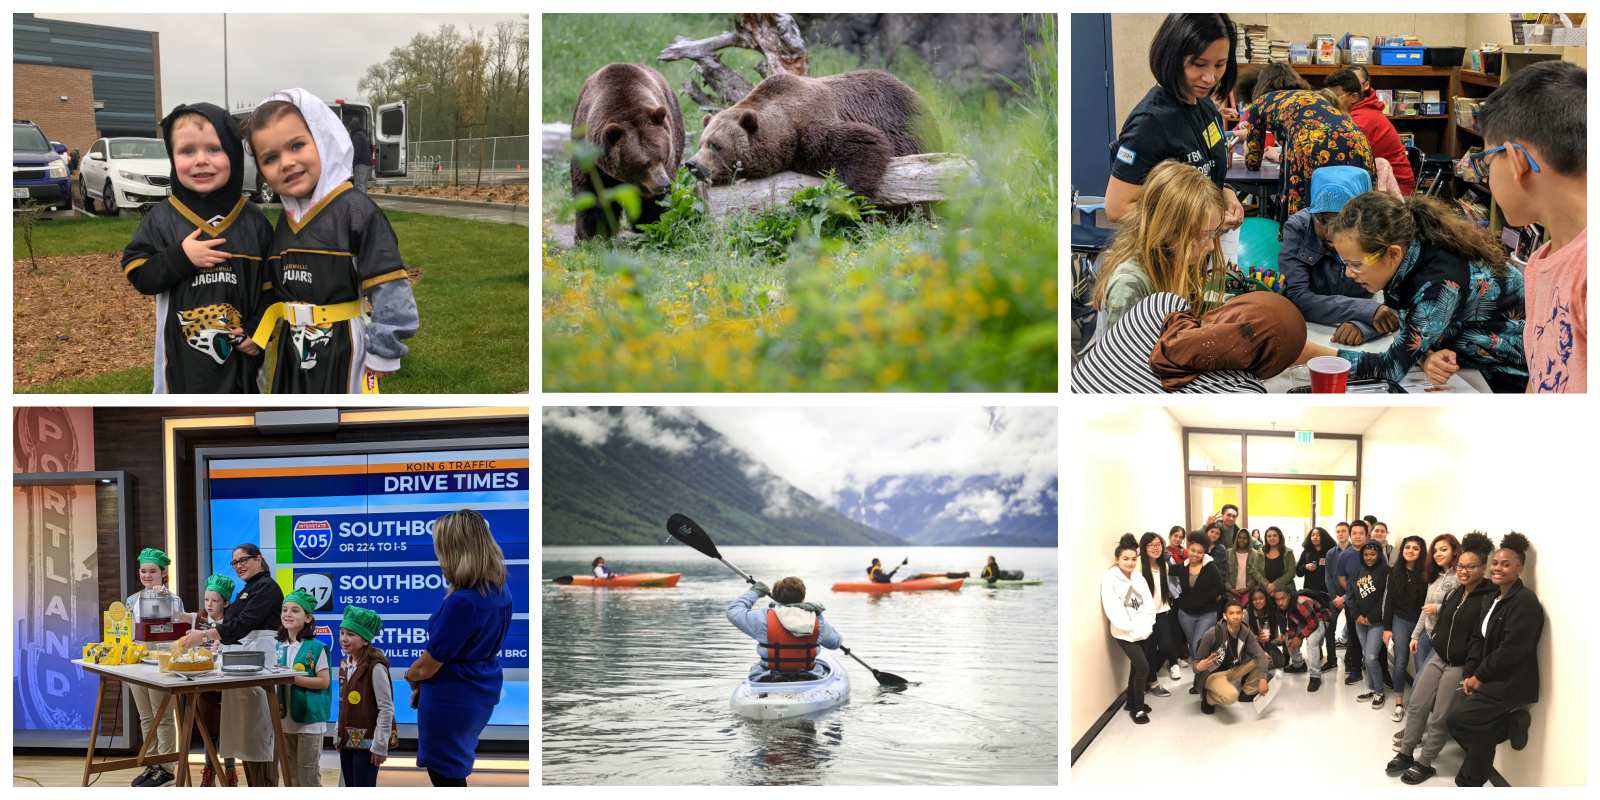 Image 1: two young boys wearing jerseys smile for the camera. Image 2: a group of Girl Scouts wearing green Girl Scout hats present their project on Live TV. Image 3: two brown bears on a log. Image 4: Four people canoe on a lake. Image 5: A group of young students and a teacher work on a project inside a classroom. Image 6: a large group of teenagers smile for the camera inside a hallway. 